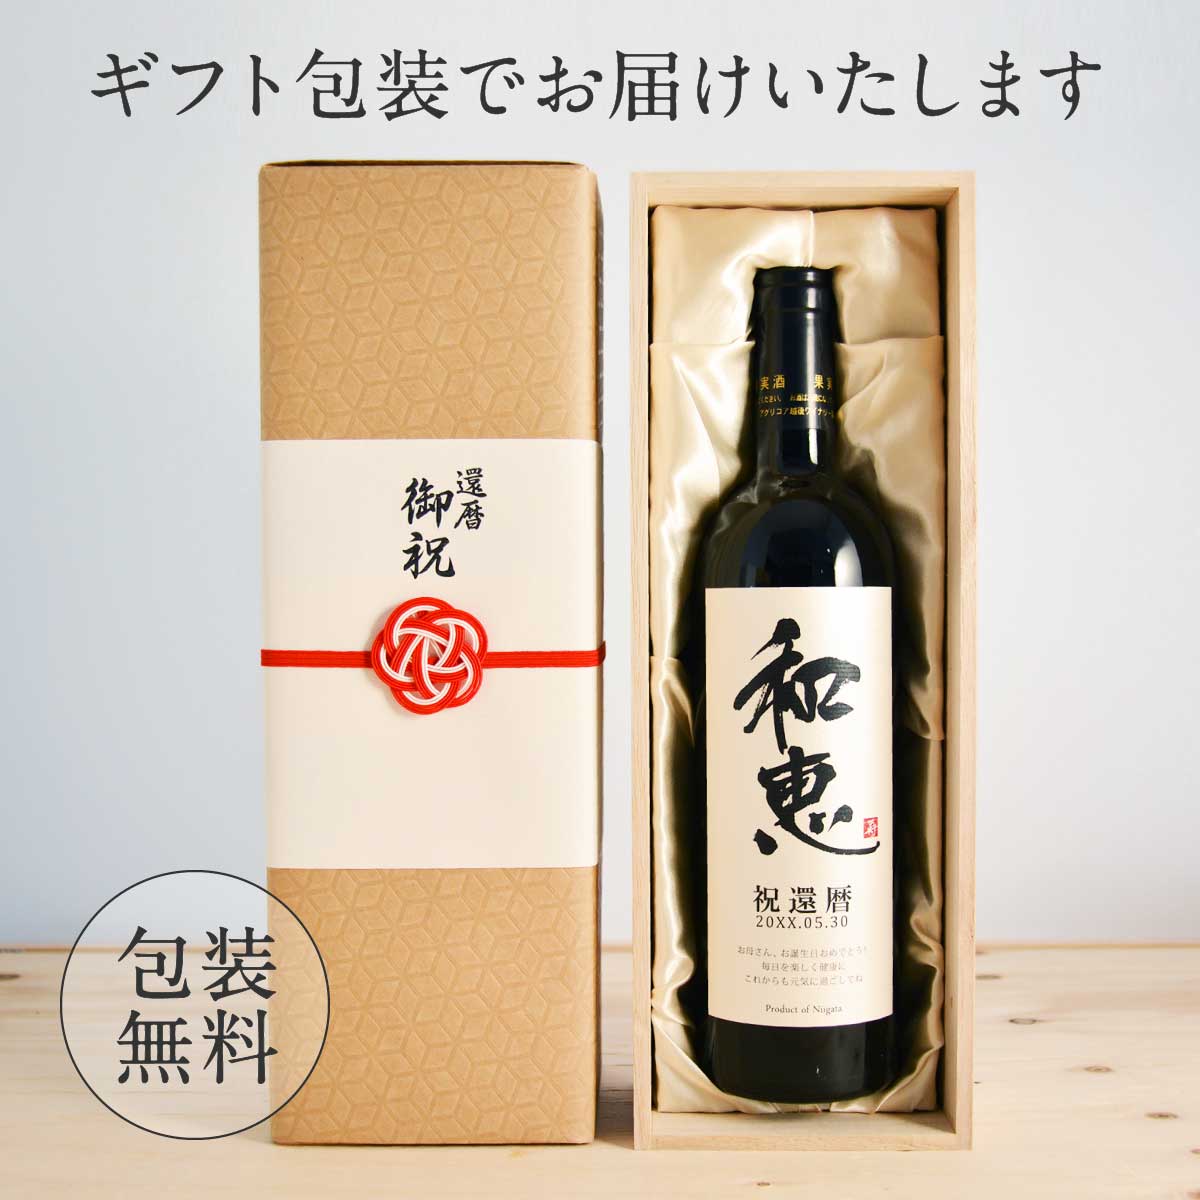 . calendar festival . present man woman on .. calendar gift present name inserting same day shipping 60 year front. newspaper attaching . Chinese character label wine ( red or white )750ml_mf